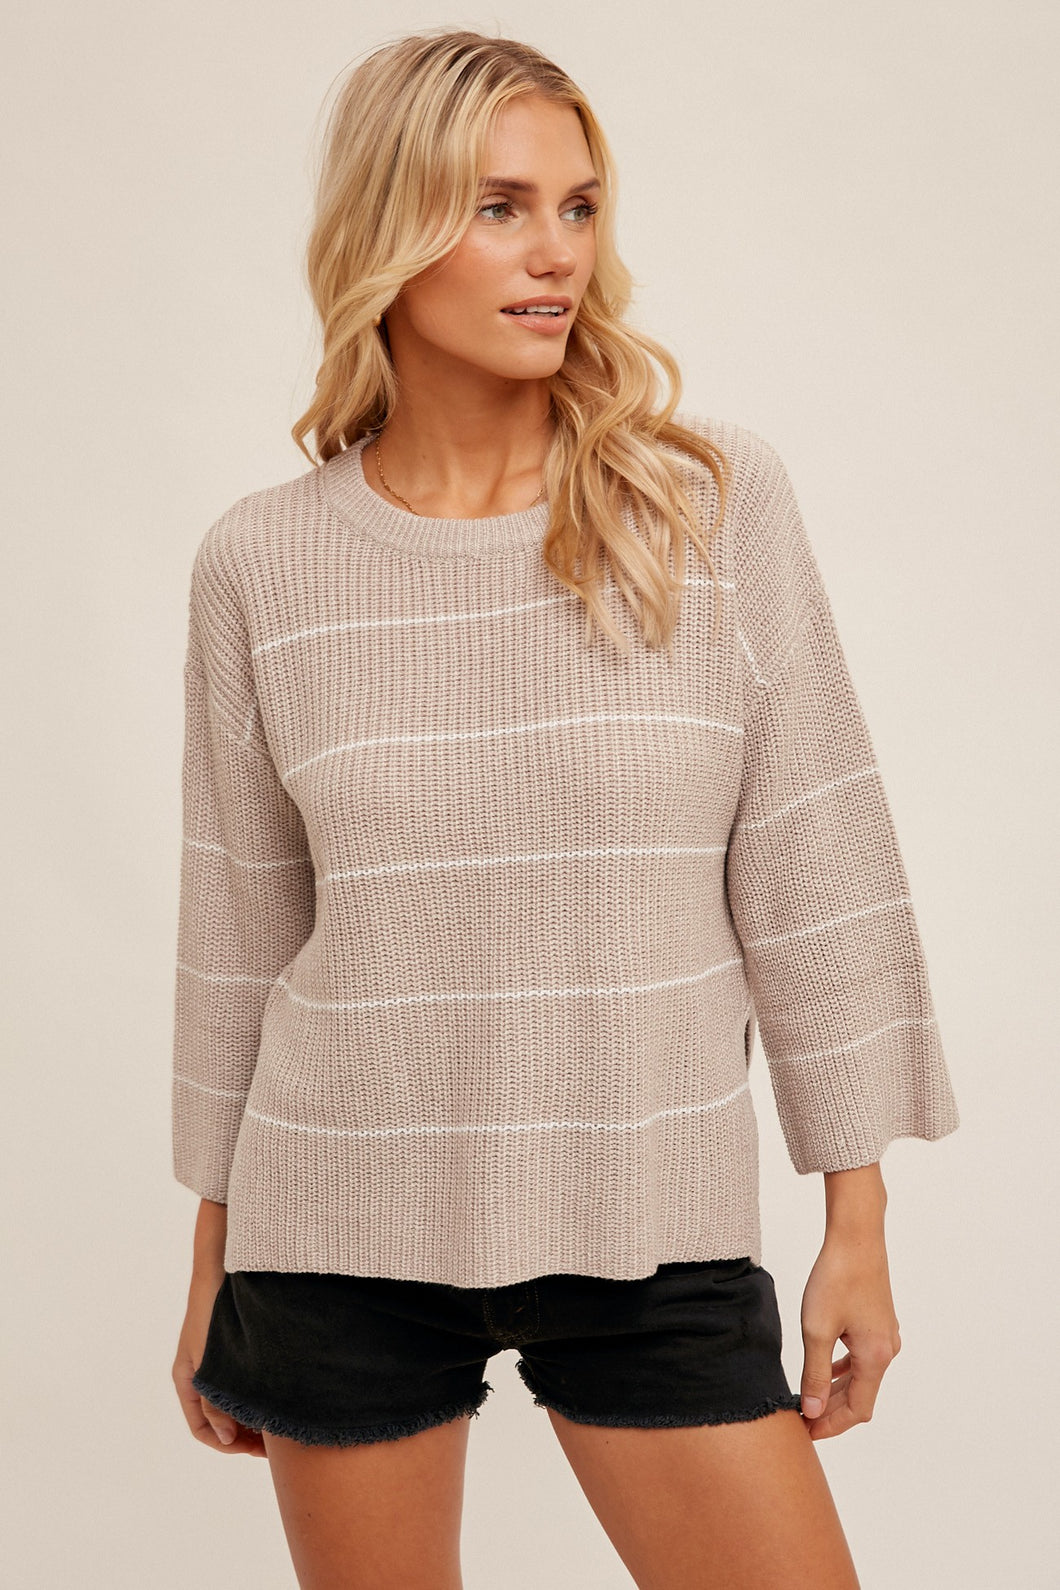 Taupe Knit Hannah Sweater